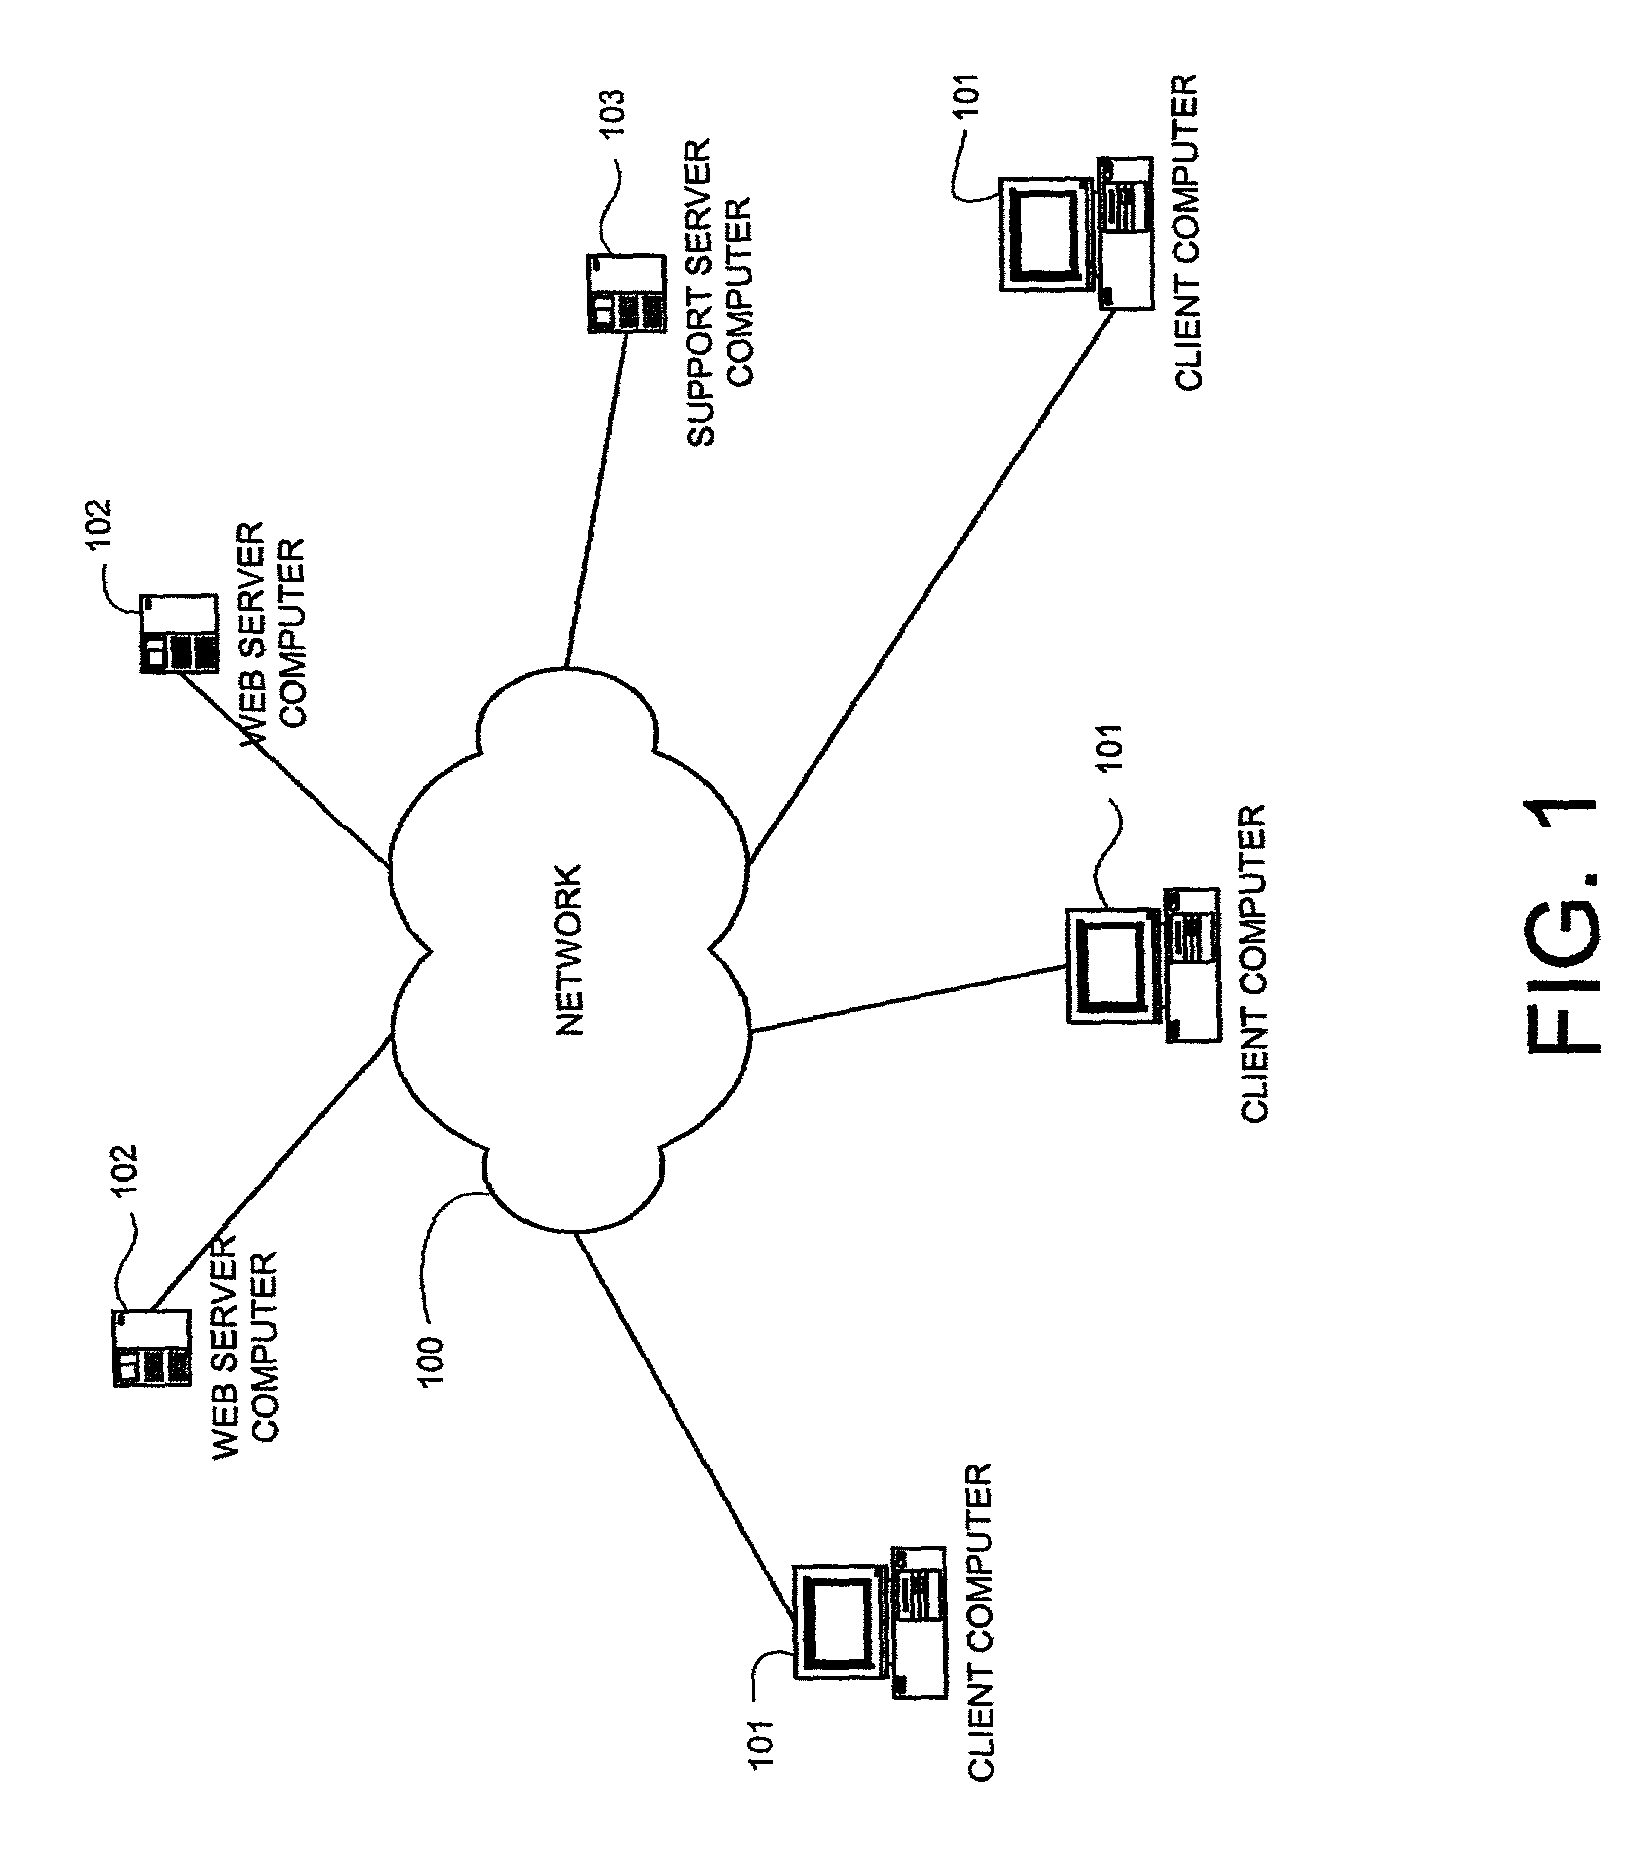 Method and apparatus for blocking unwanted windows